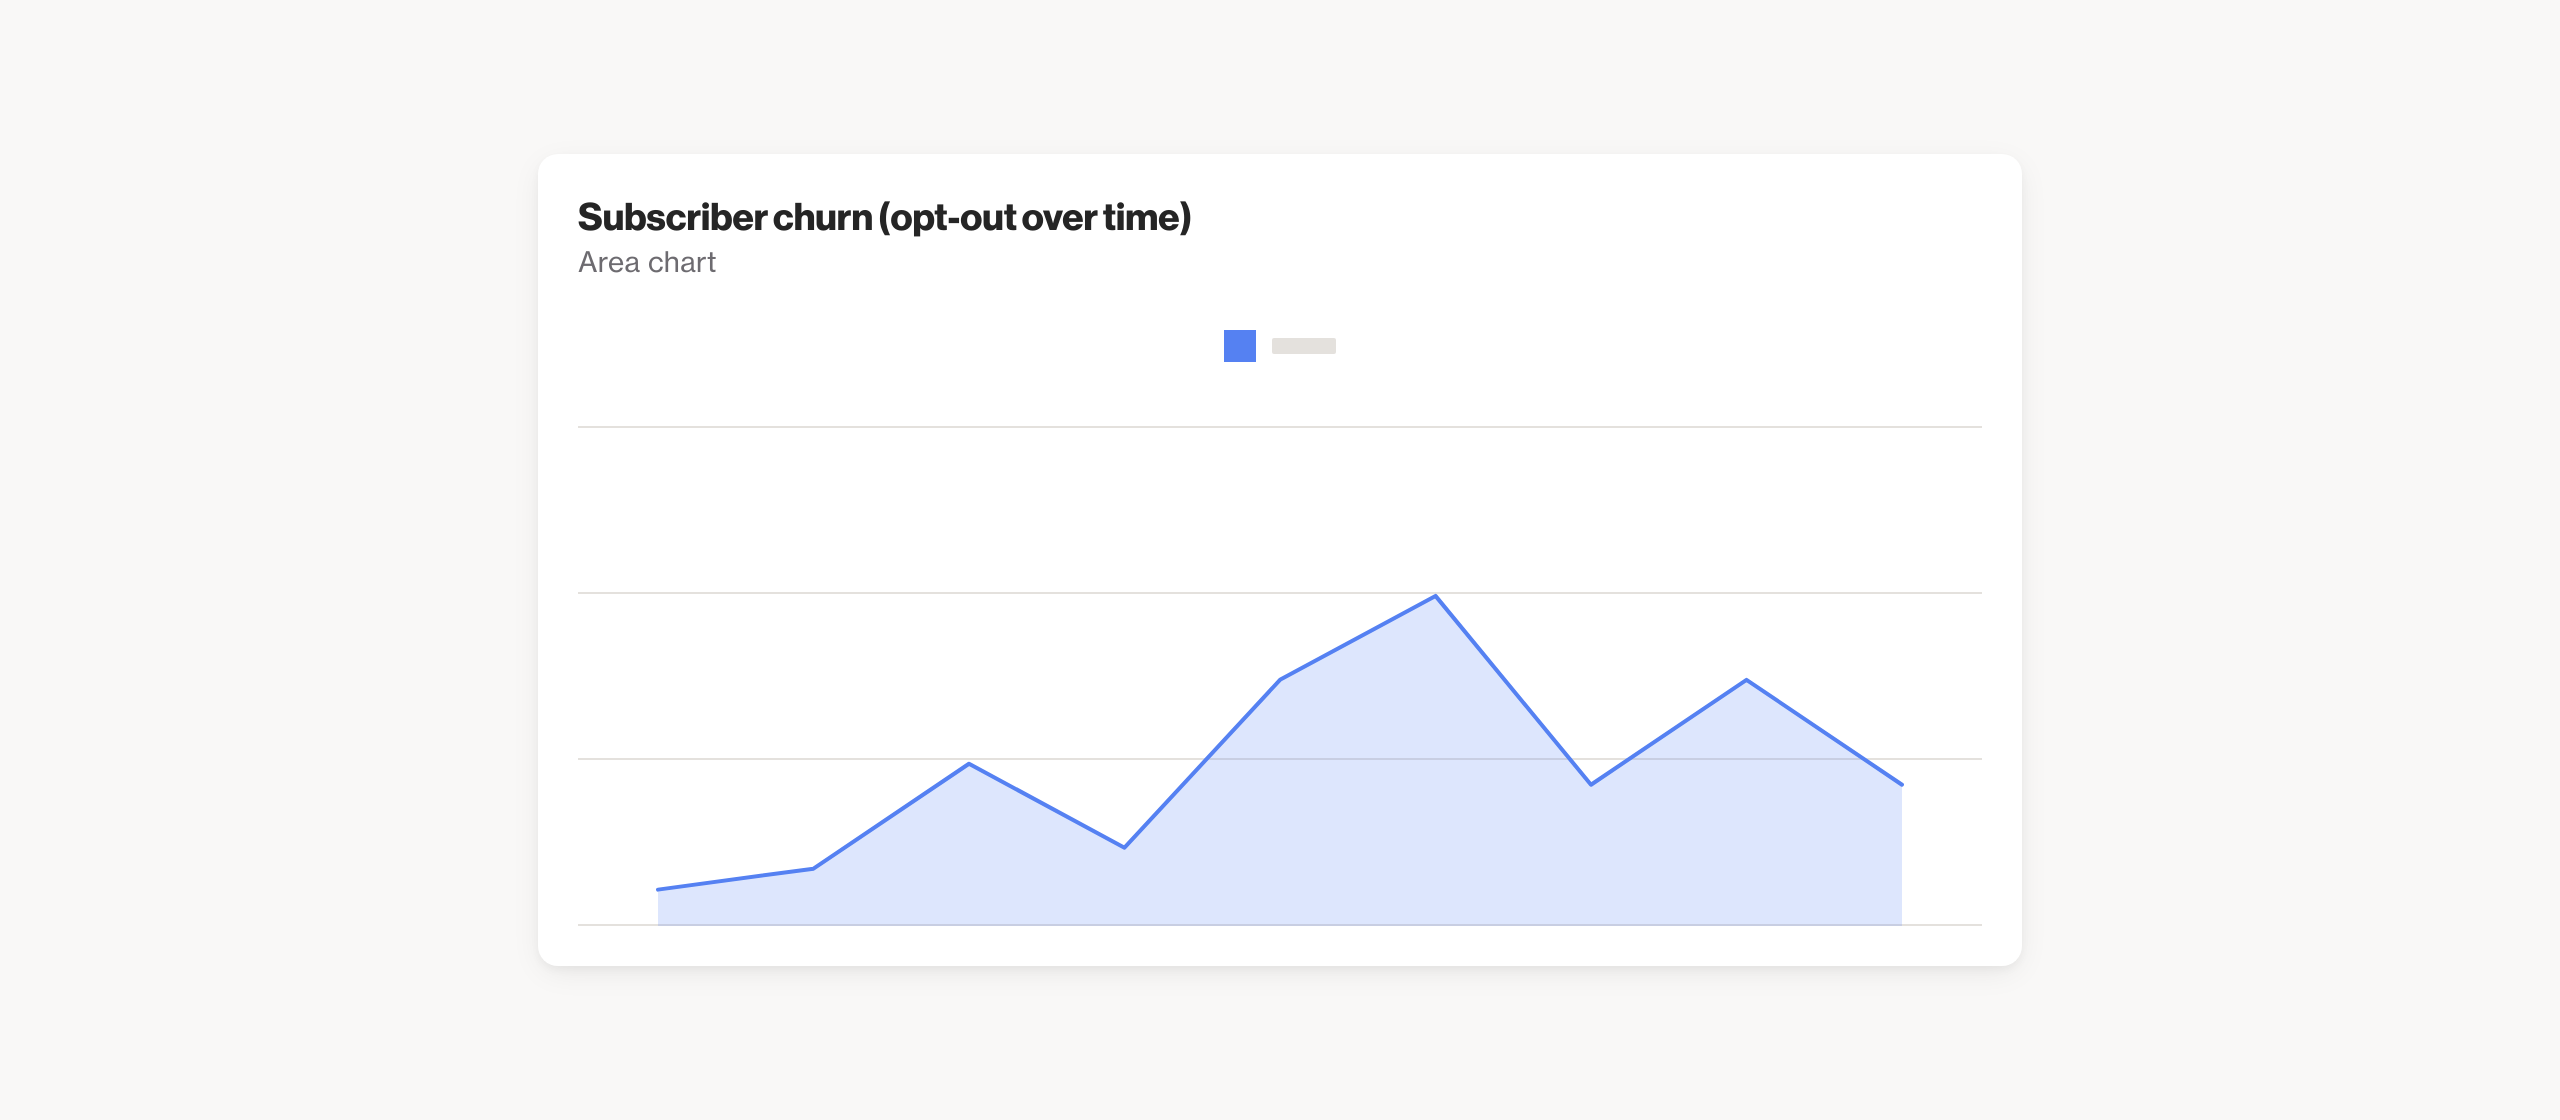 Subscriber churn (opt-out over time)